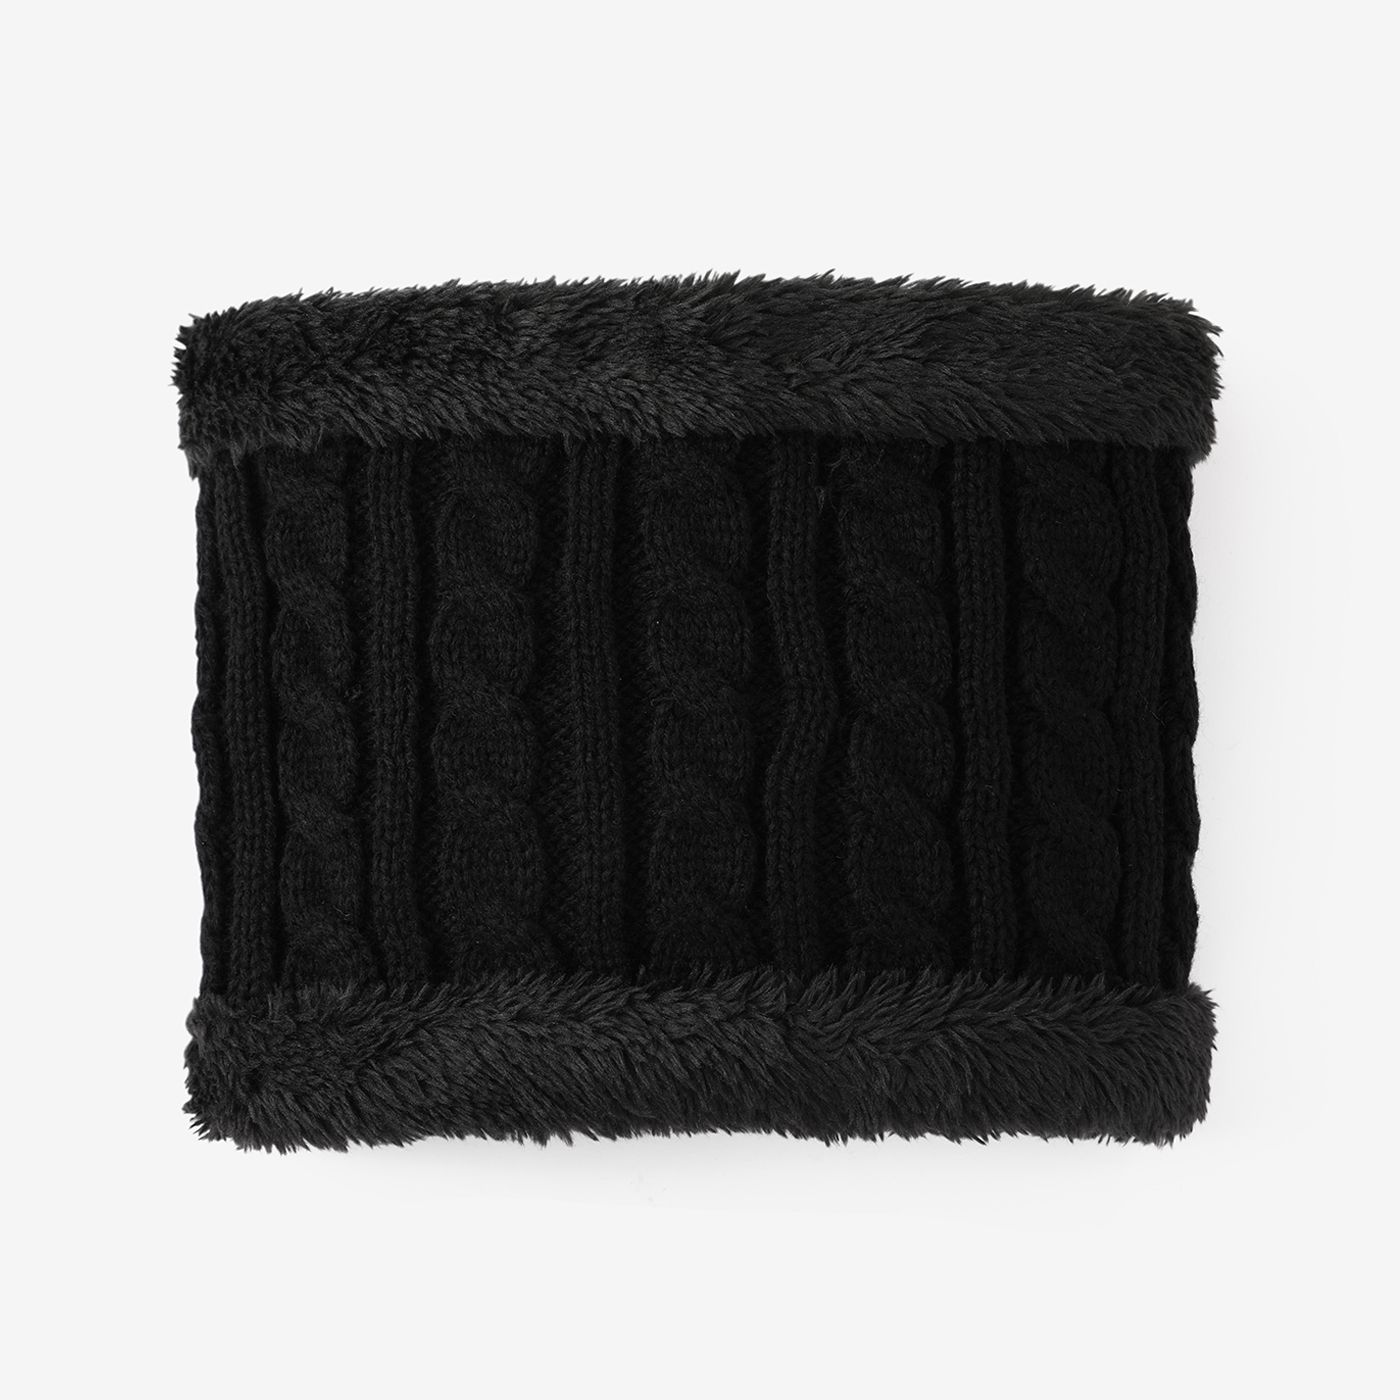 Warm Neck Warmer With Velvet On The Inside And Thickened Knitting On The Outside To Keep Out The Cold For Toddler/kids